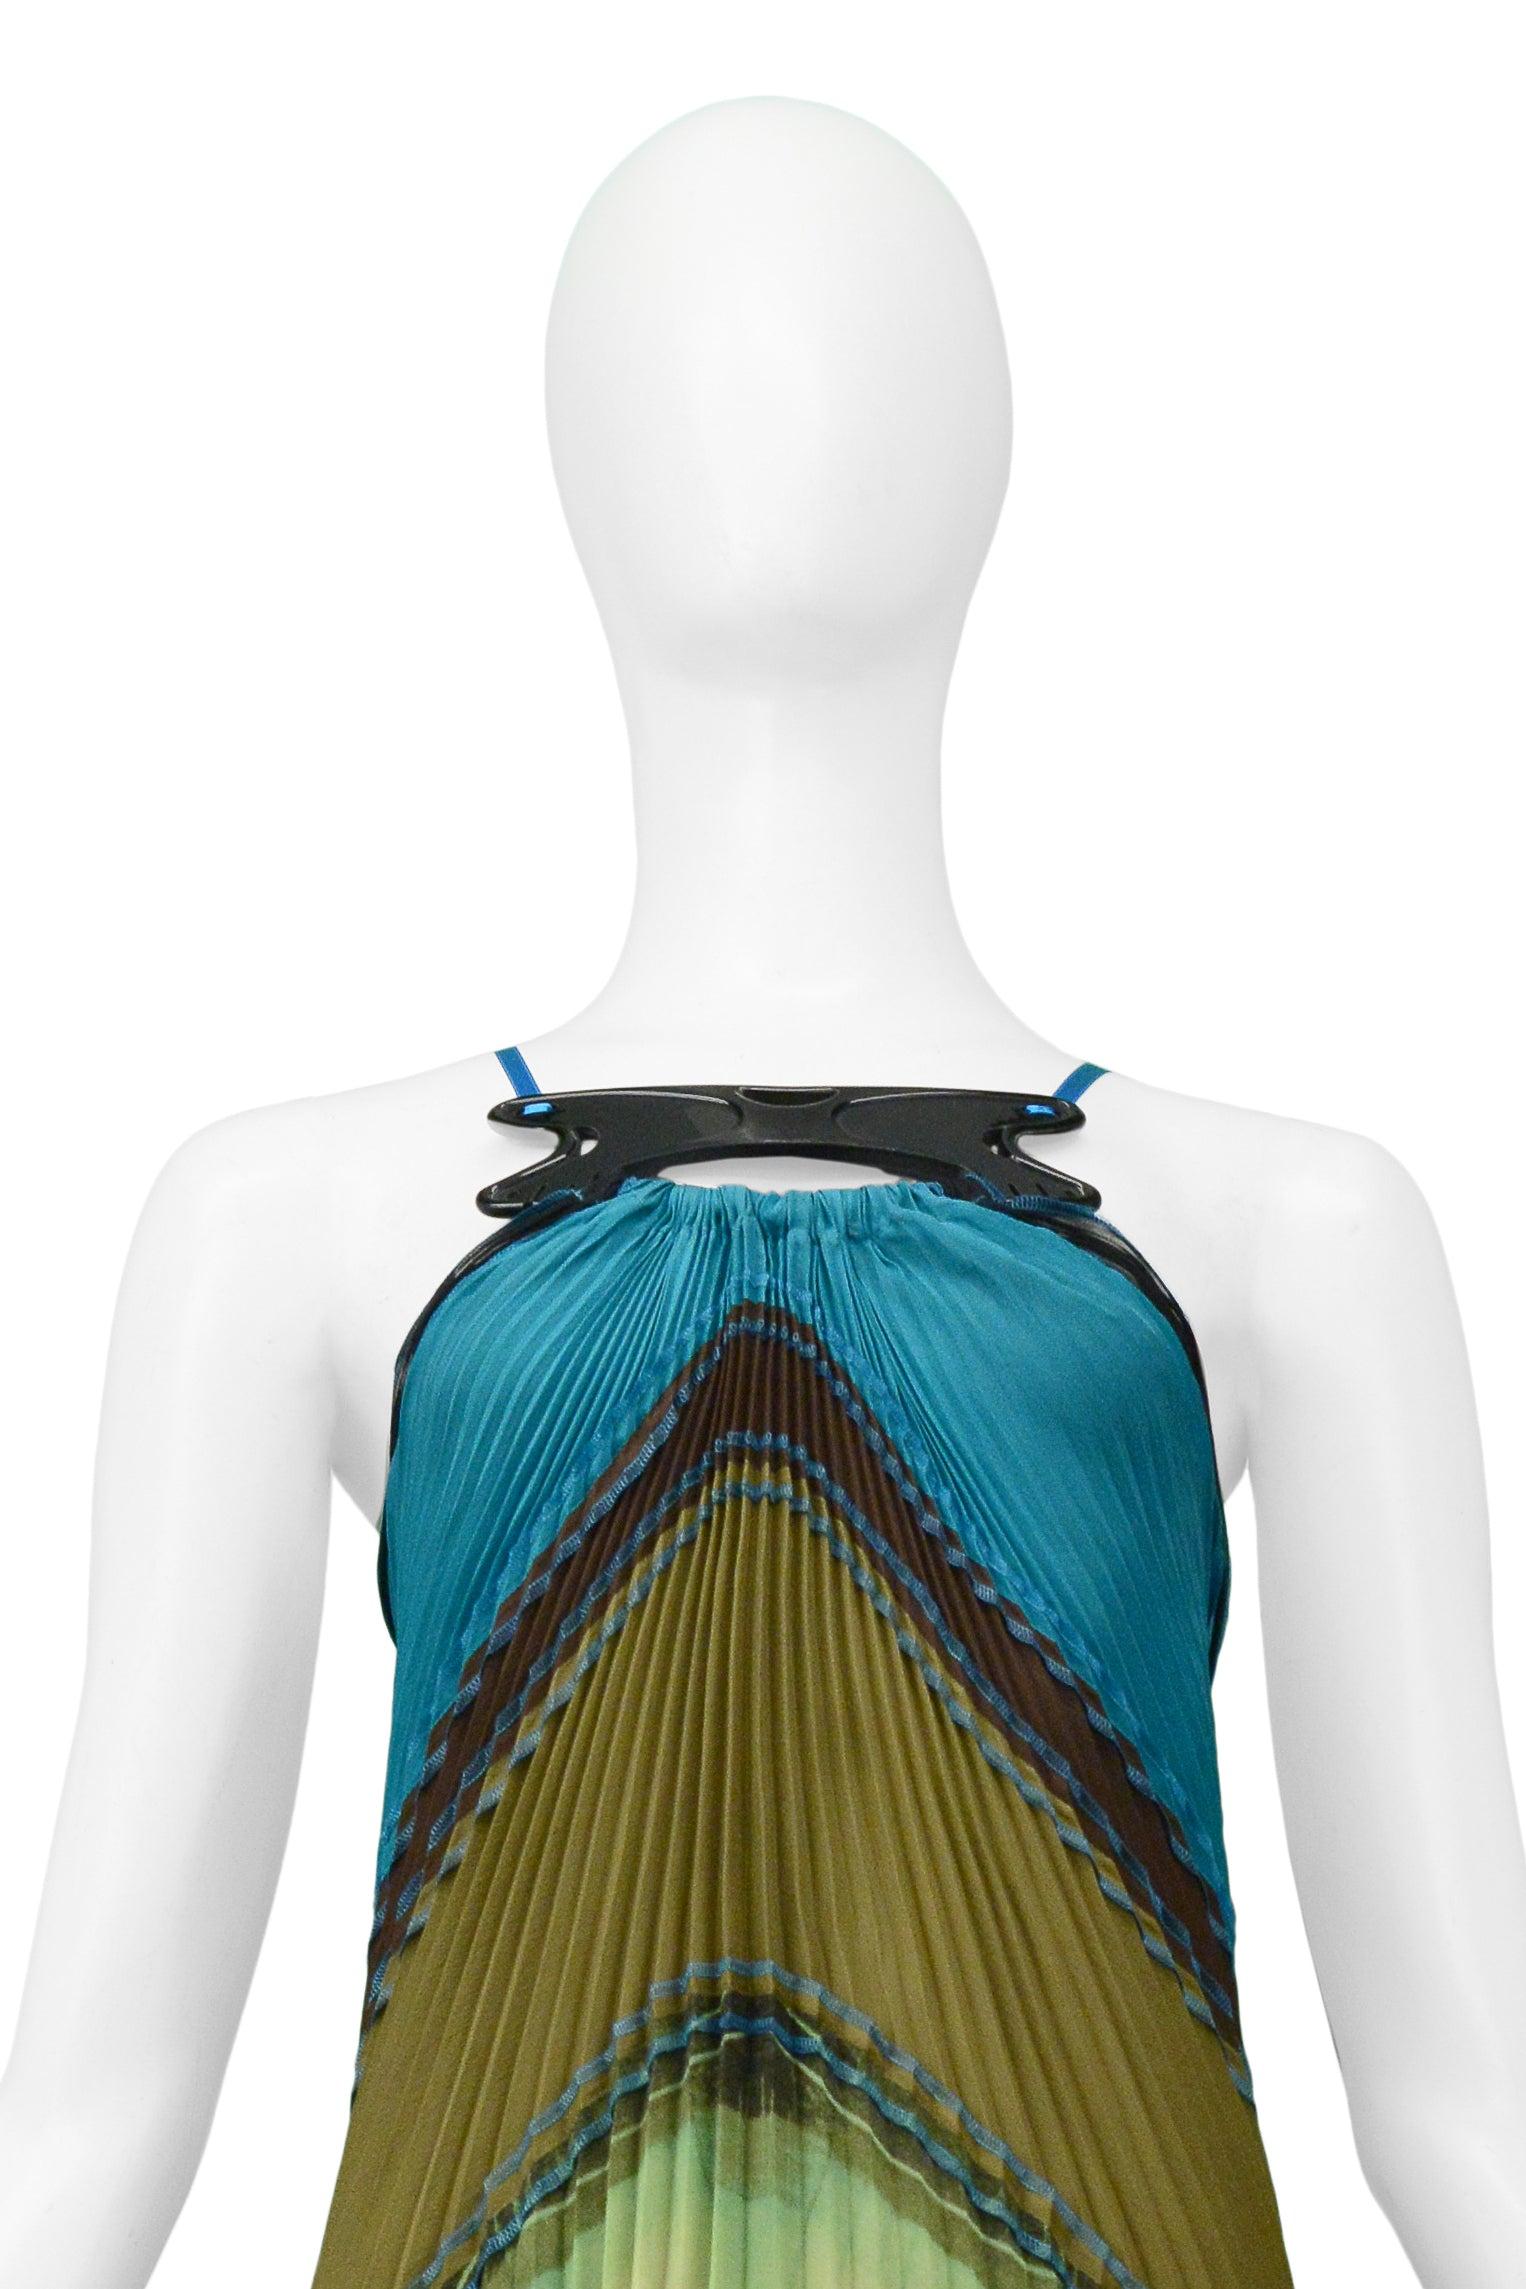 Women's Gaultier 2005 Futuristic Pleated Halter Gown With Acrylic Collar